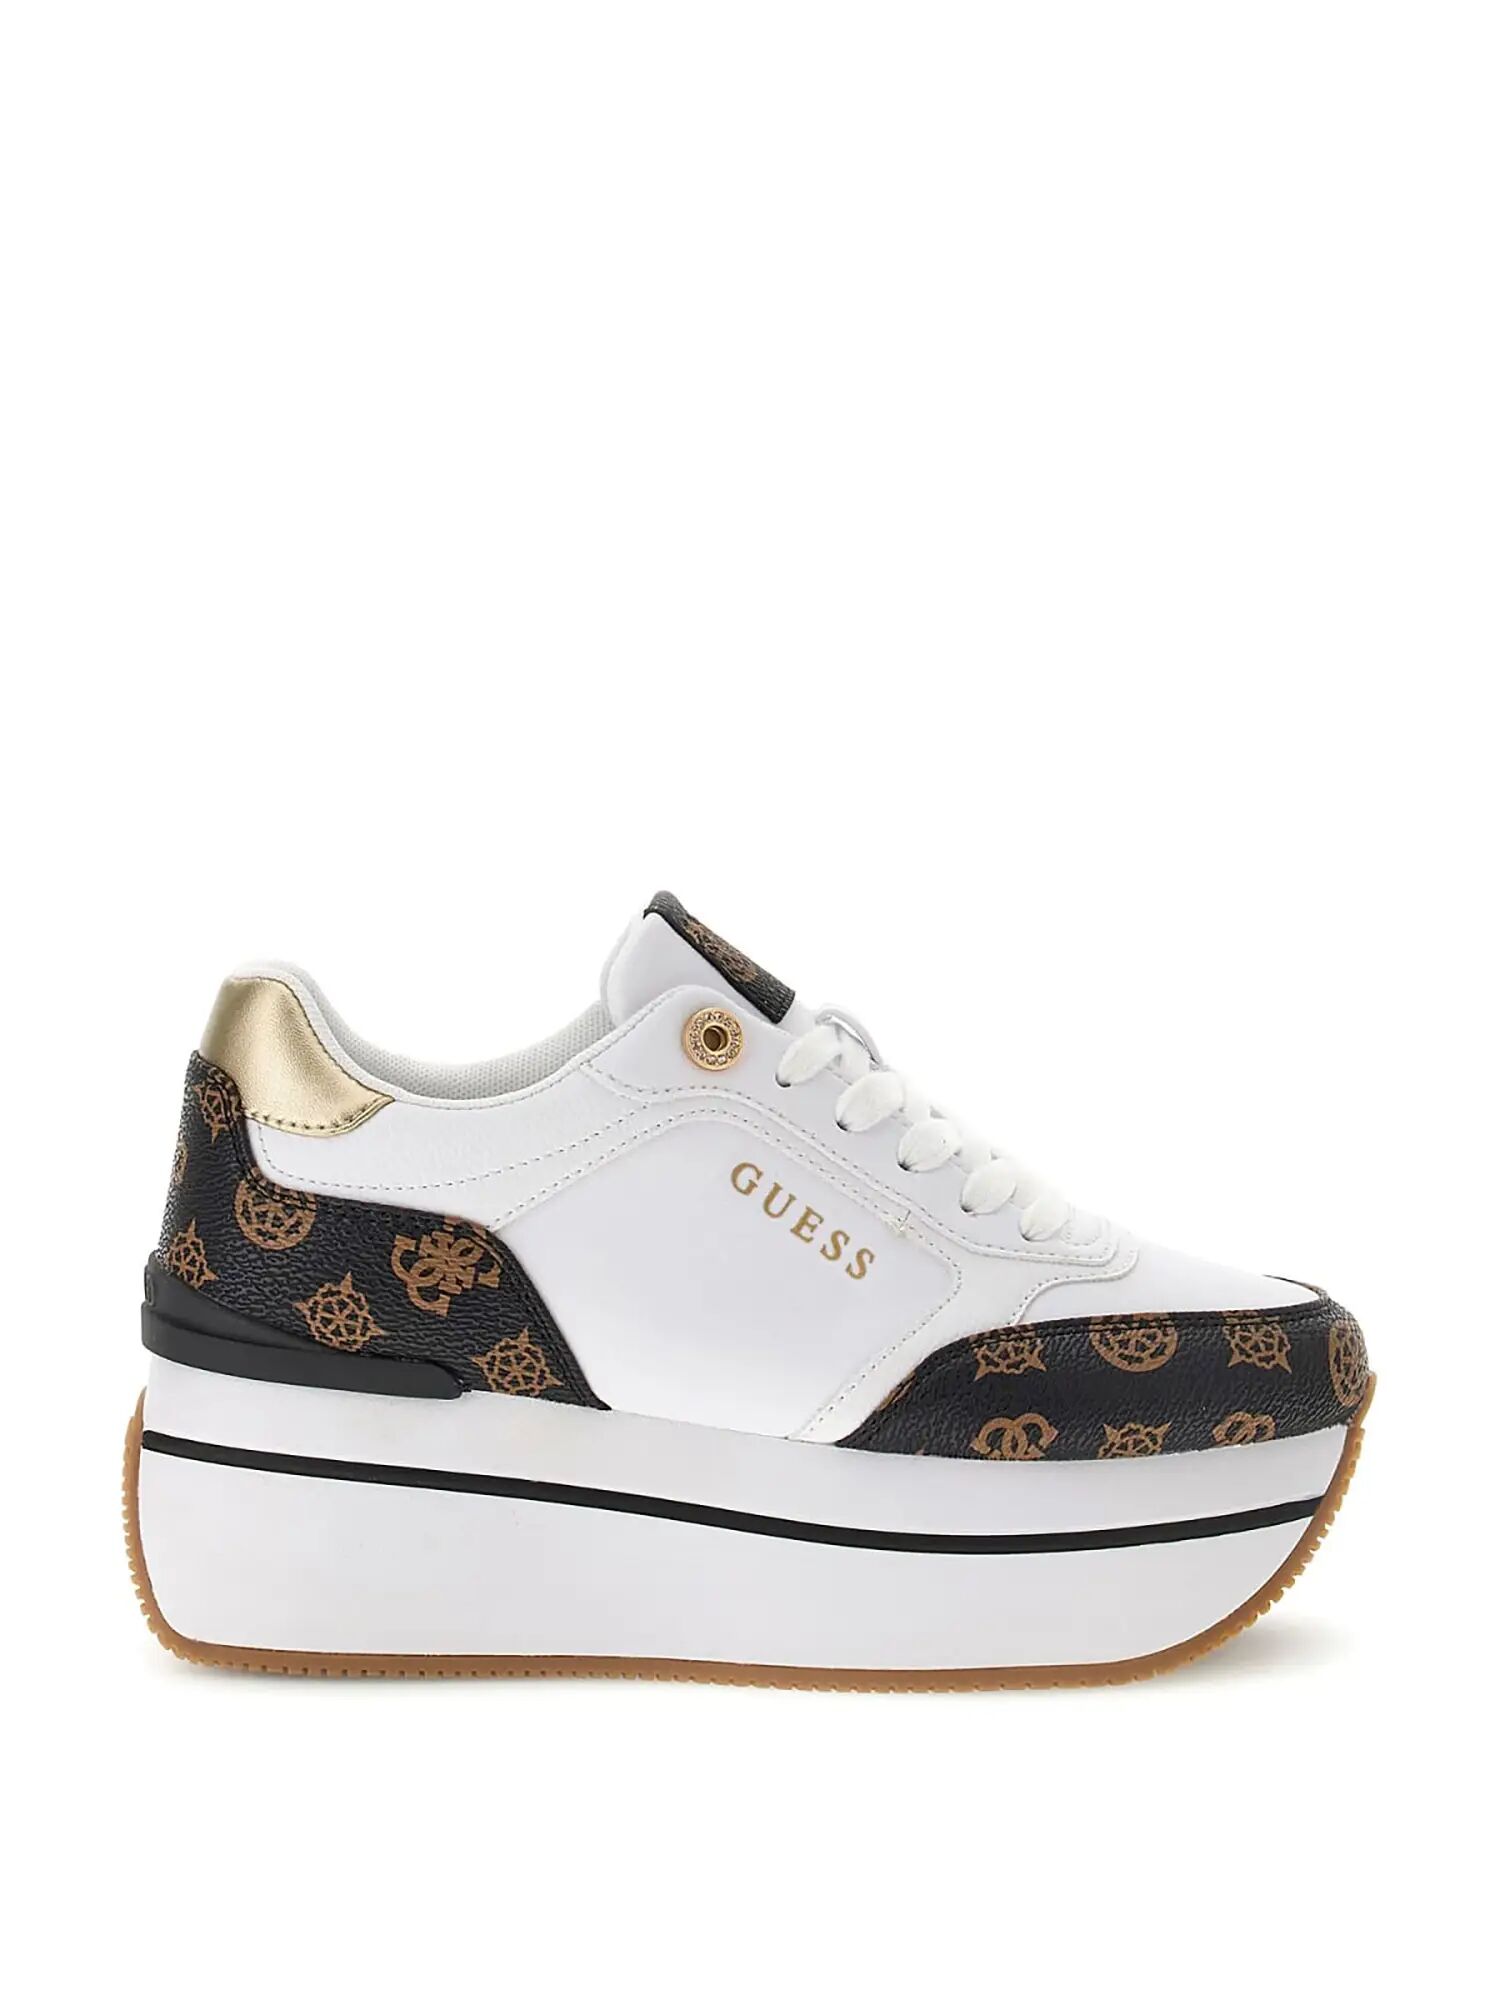 Guess Sneakers Bianche Donna BIANCO/MARRONE 36